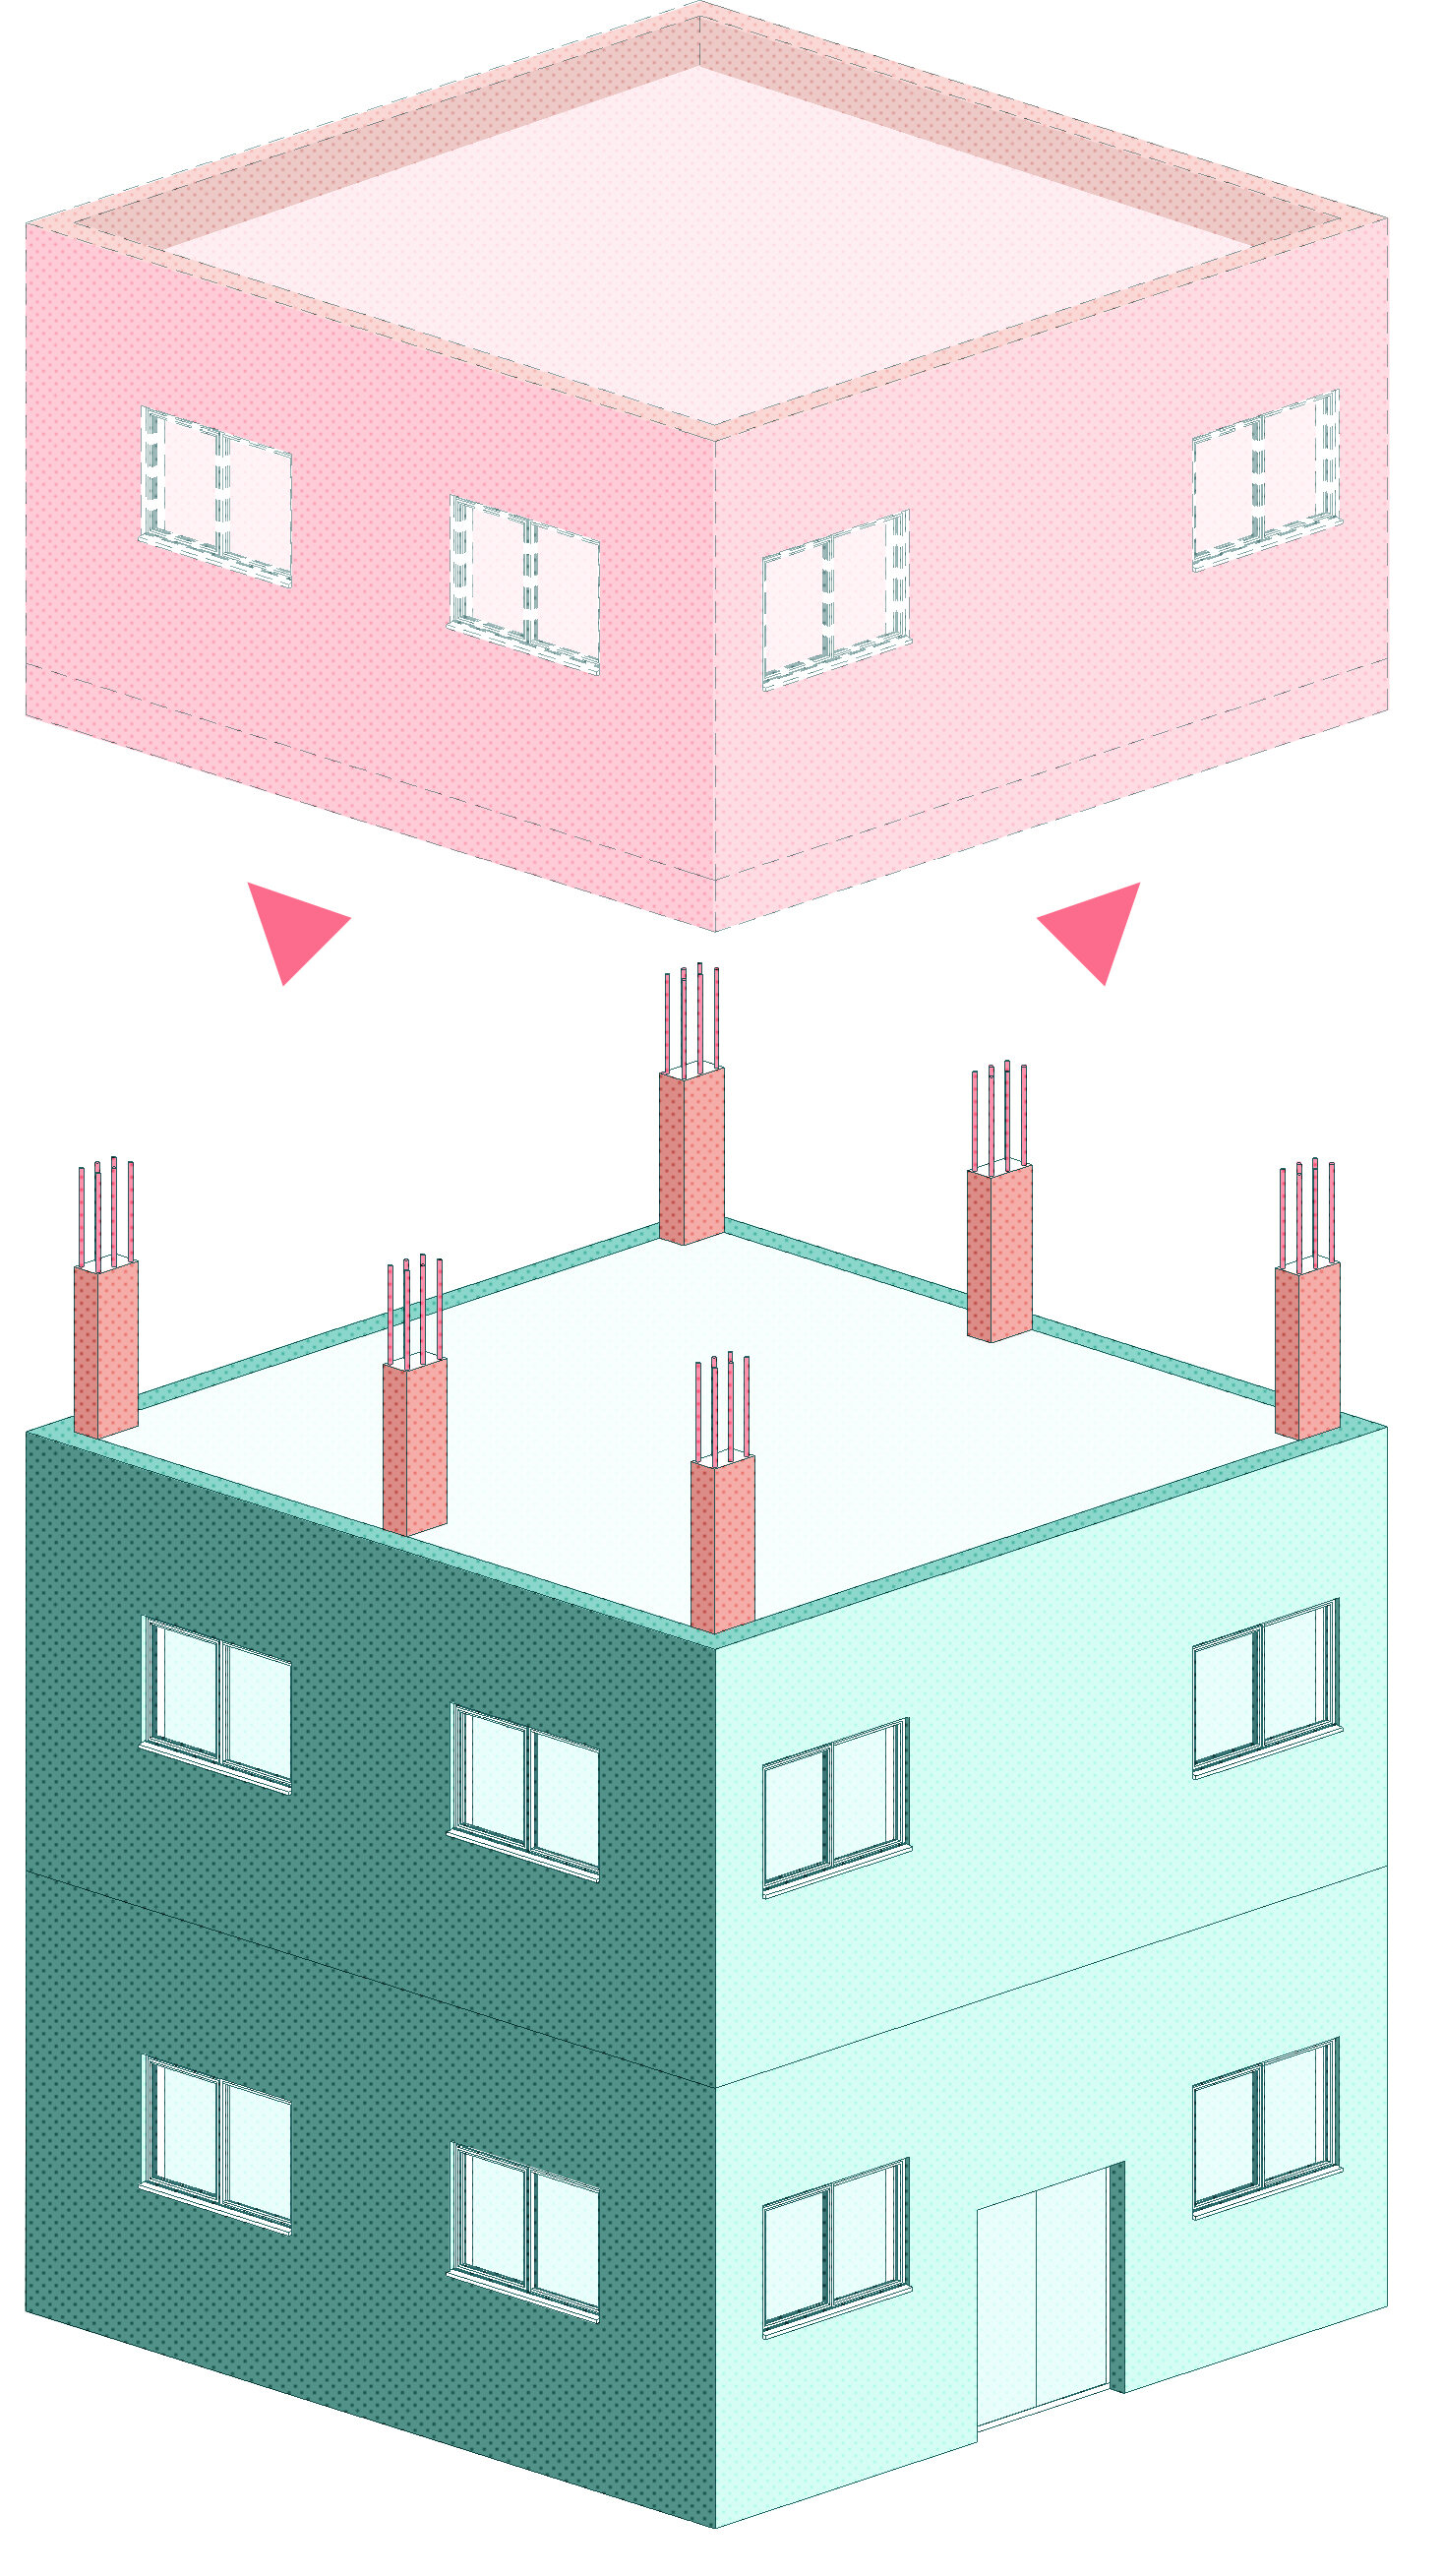  Diagram 3. Drawing showing extruded columns on top of sample residential building and how they are meant to be used in the future through the addition of new floors. (Illustrated by Noor Marji). 